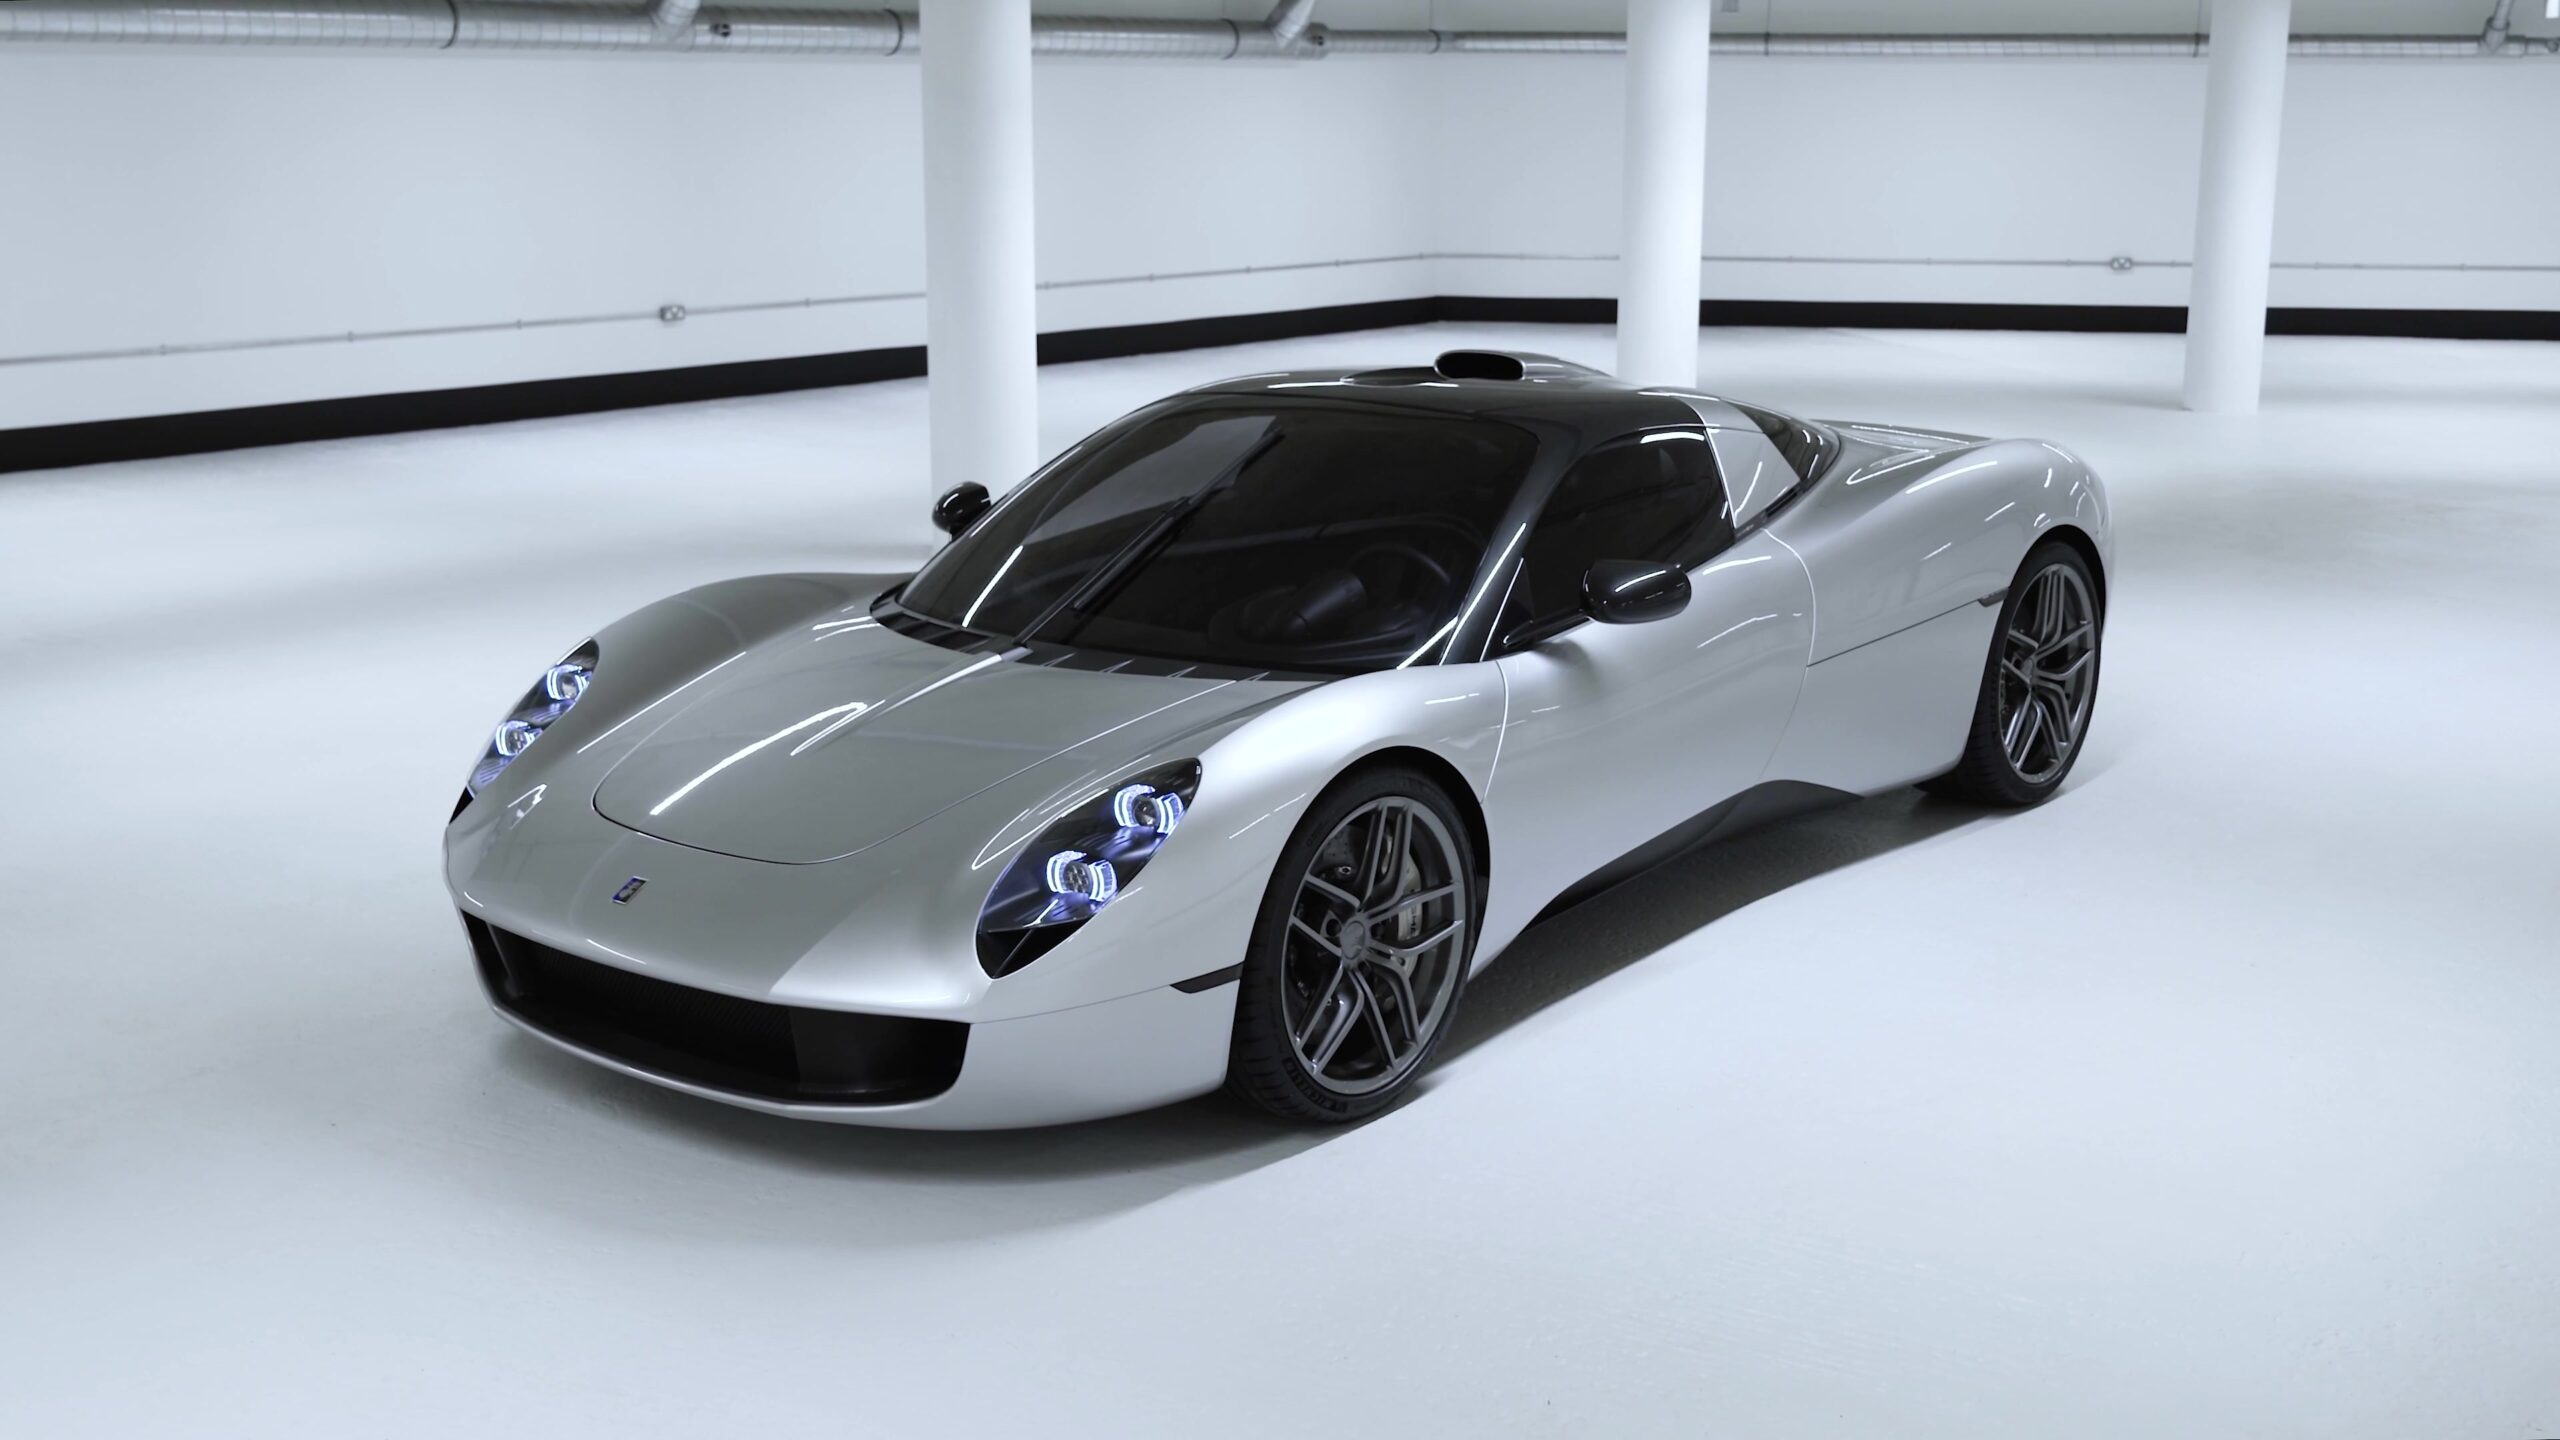 Gordon Murray Automotive reveals the all-new T.33 – a timeless Supercar